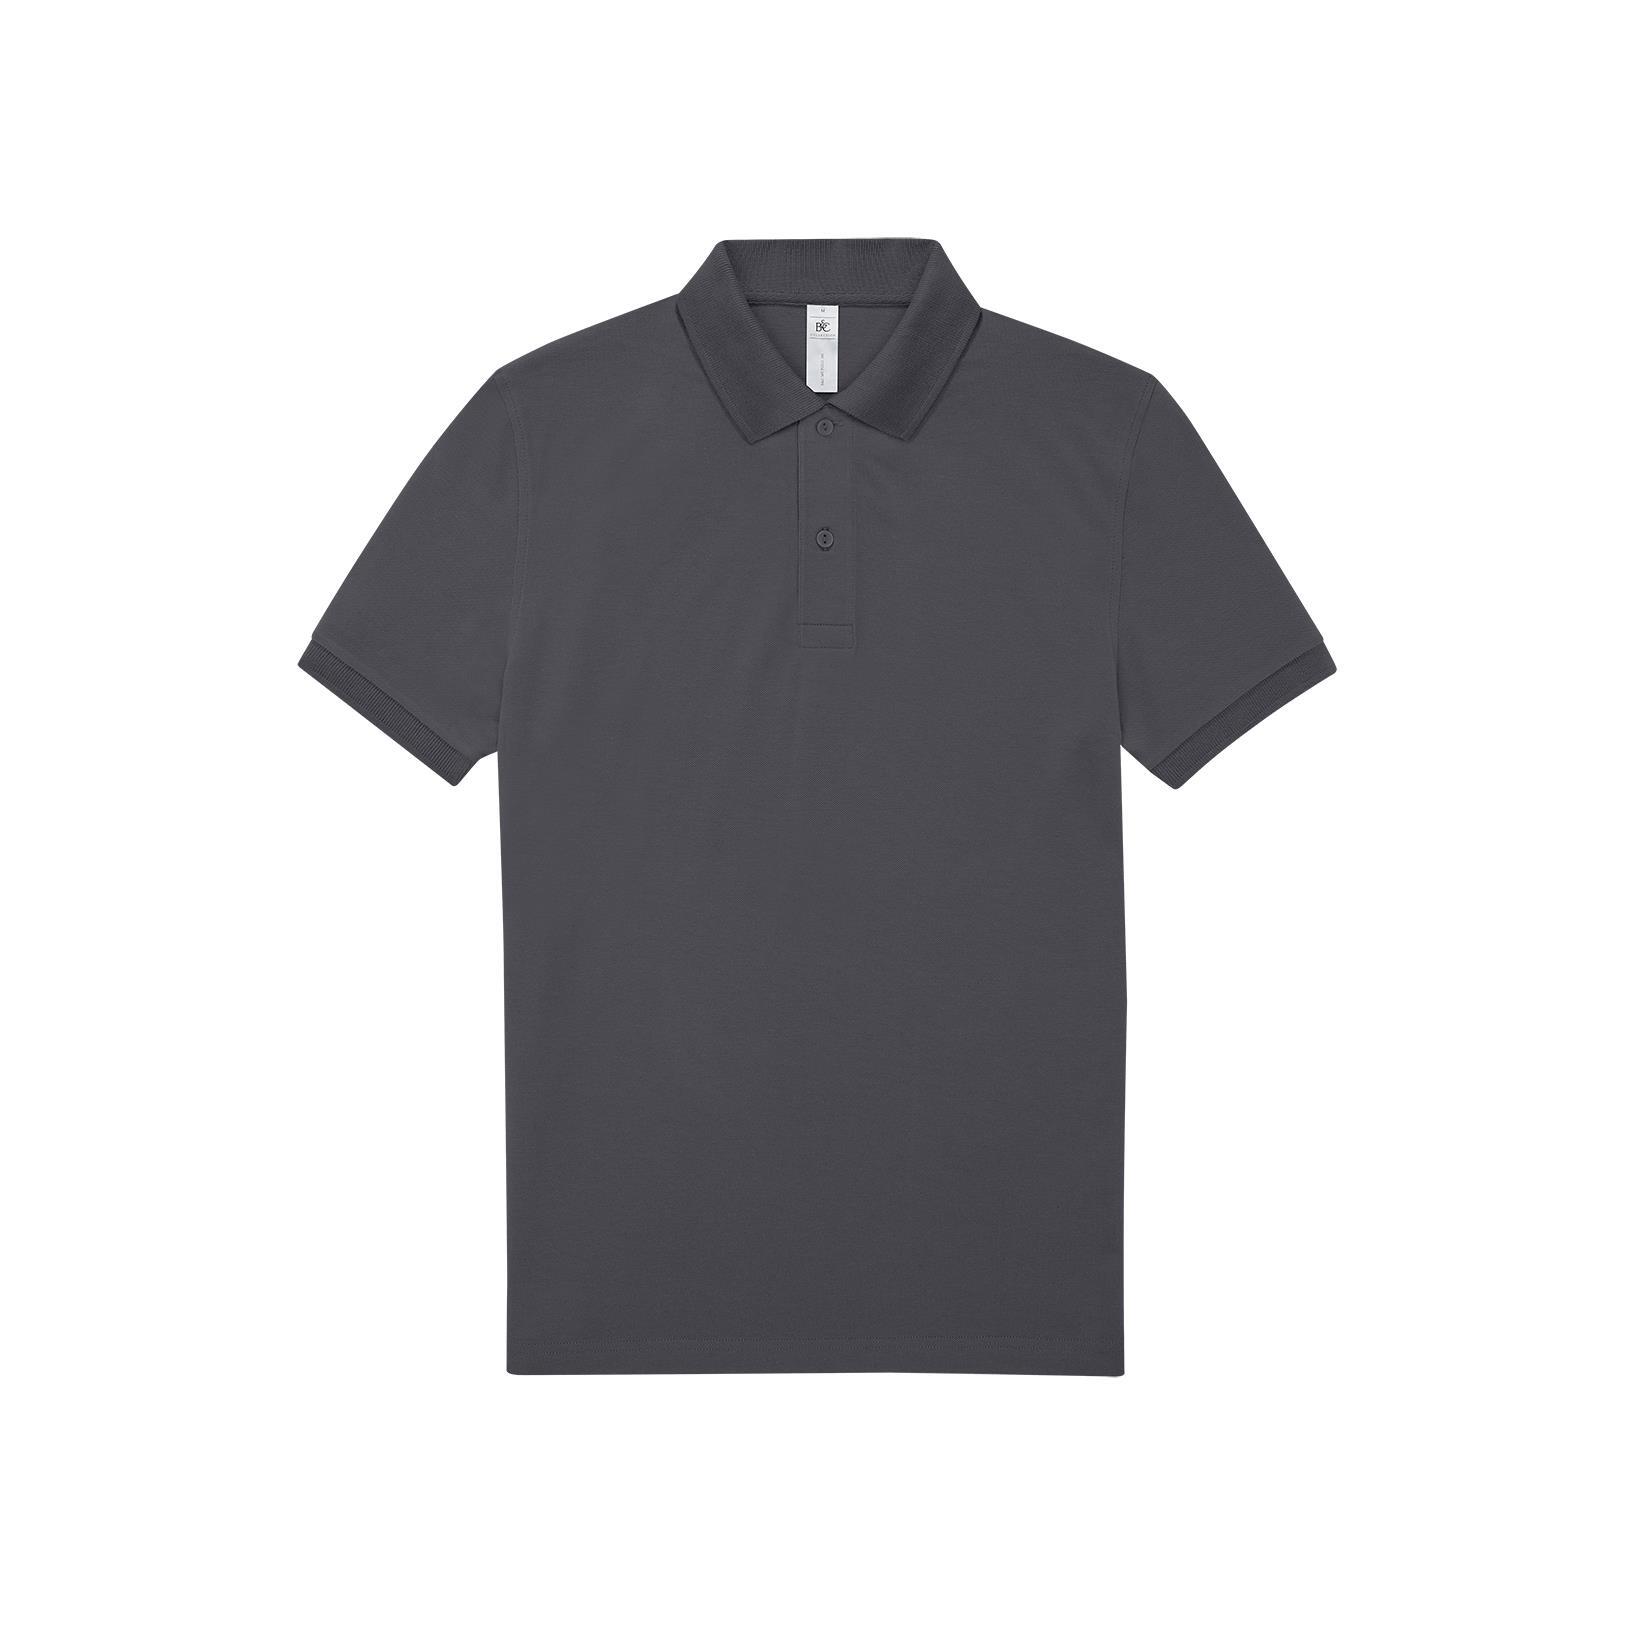 Polo voor mannen donkergrijs moderne polo